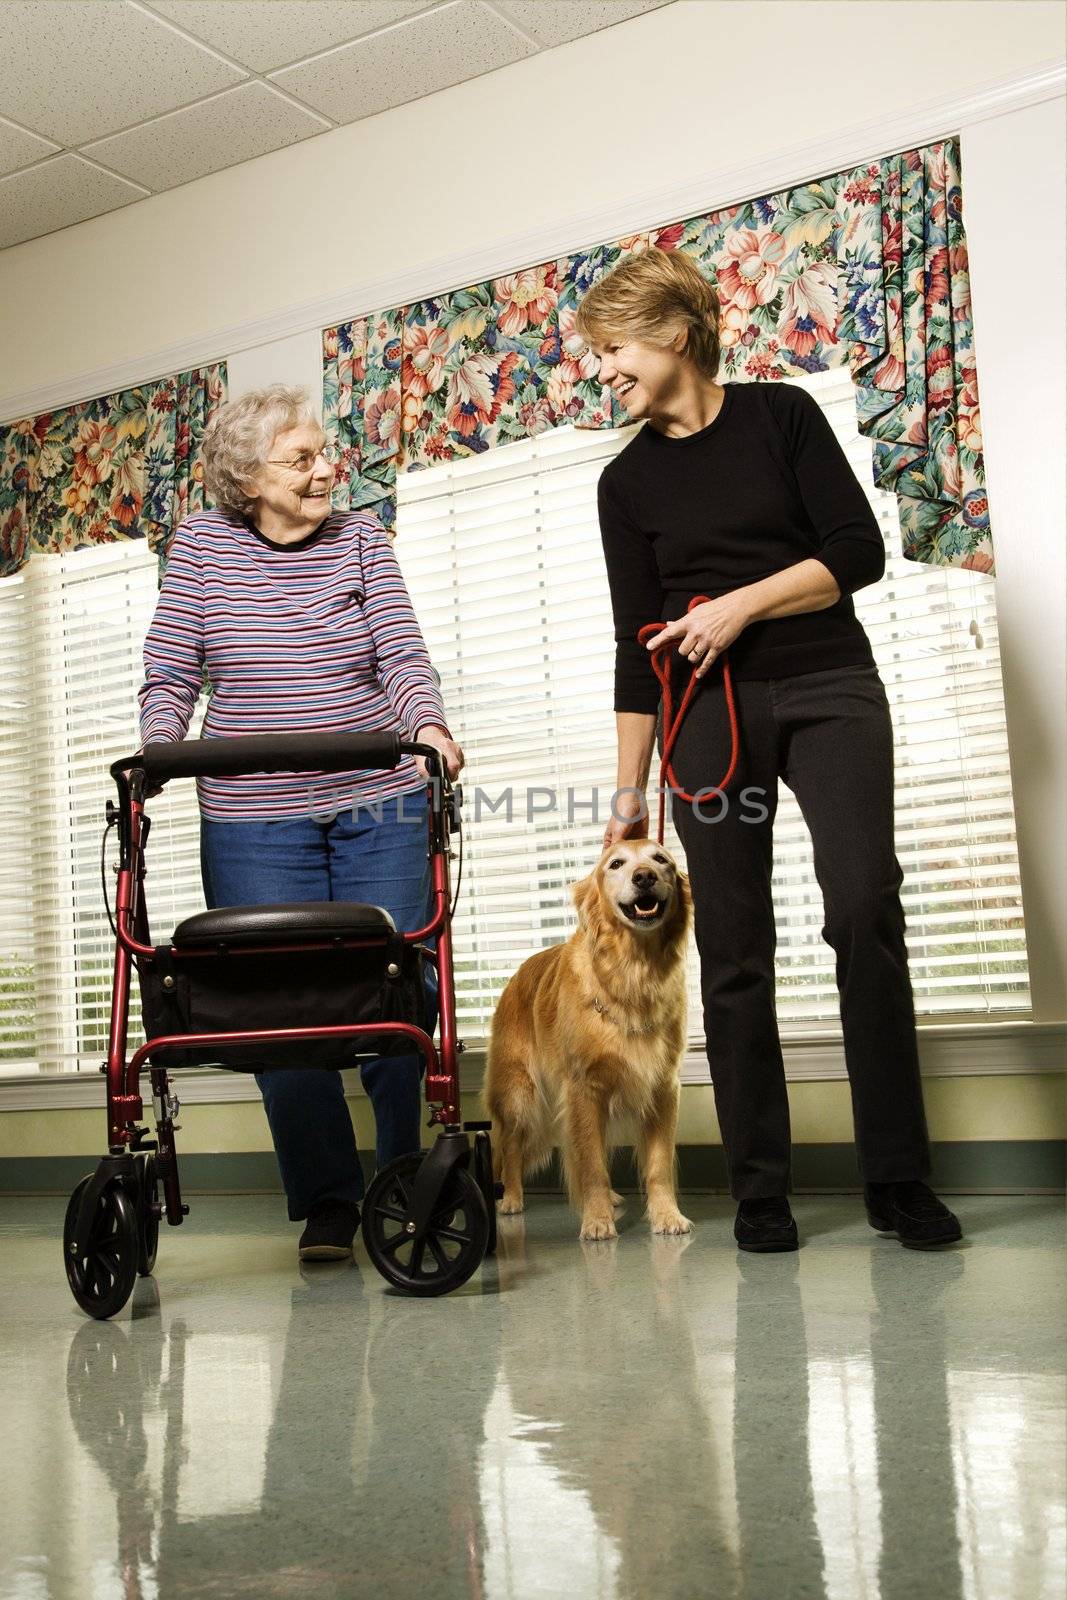 Elderly Caucasian woman using walker and middle-aged woman walking dog in hallway of retirement community center.